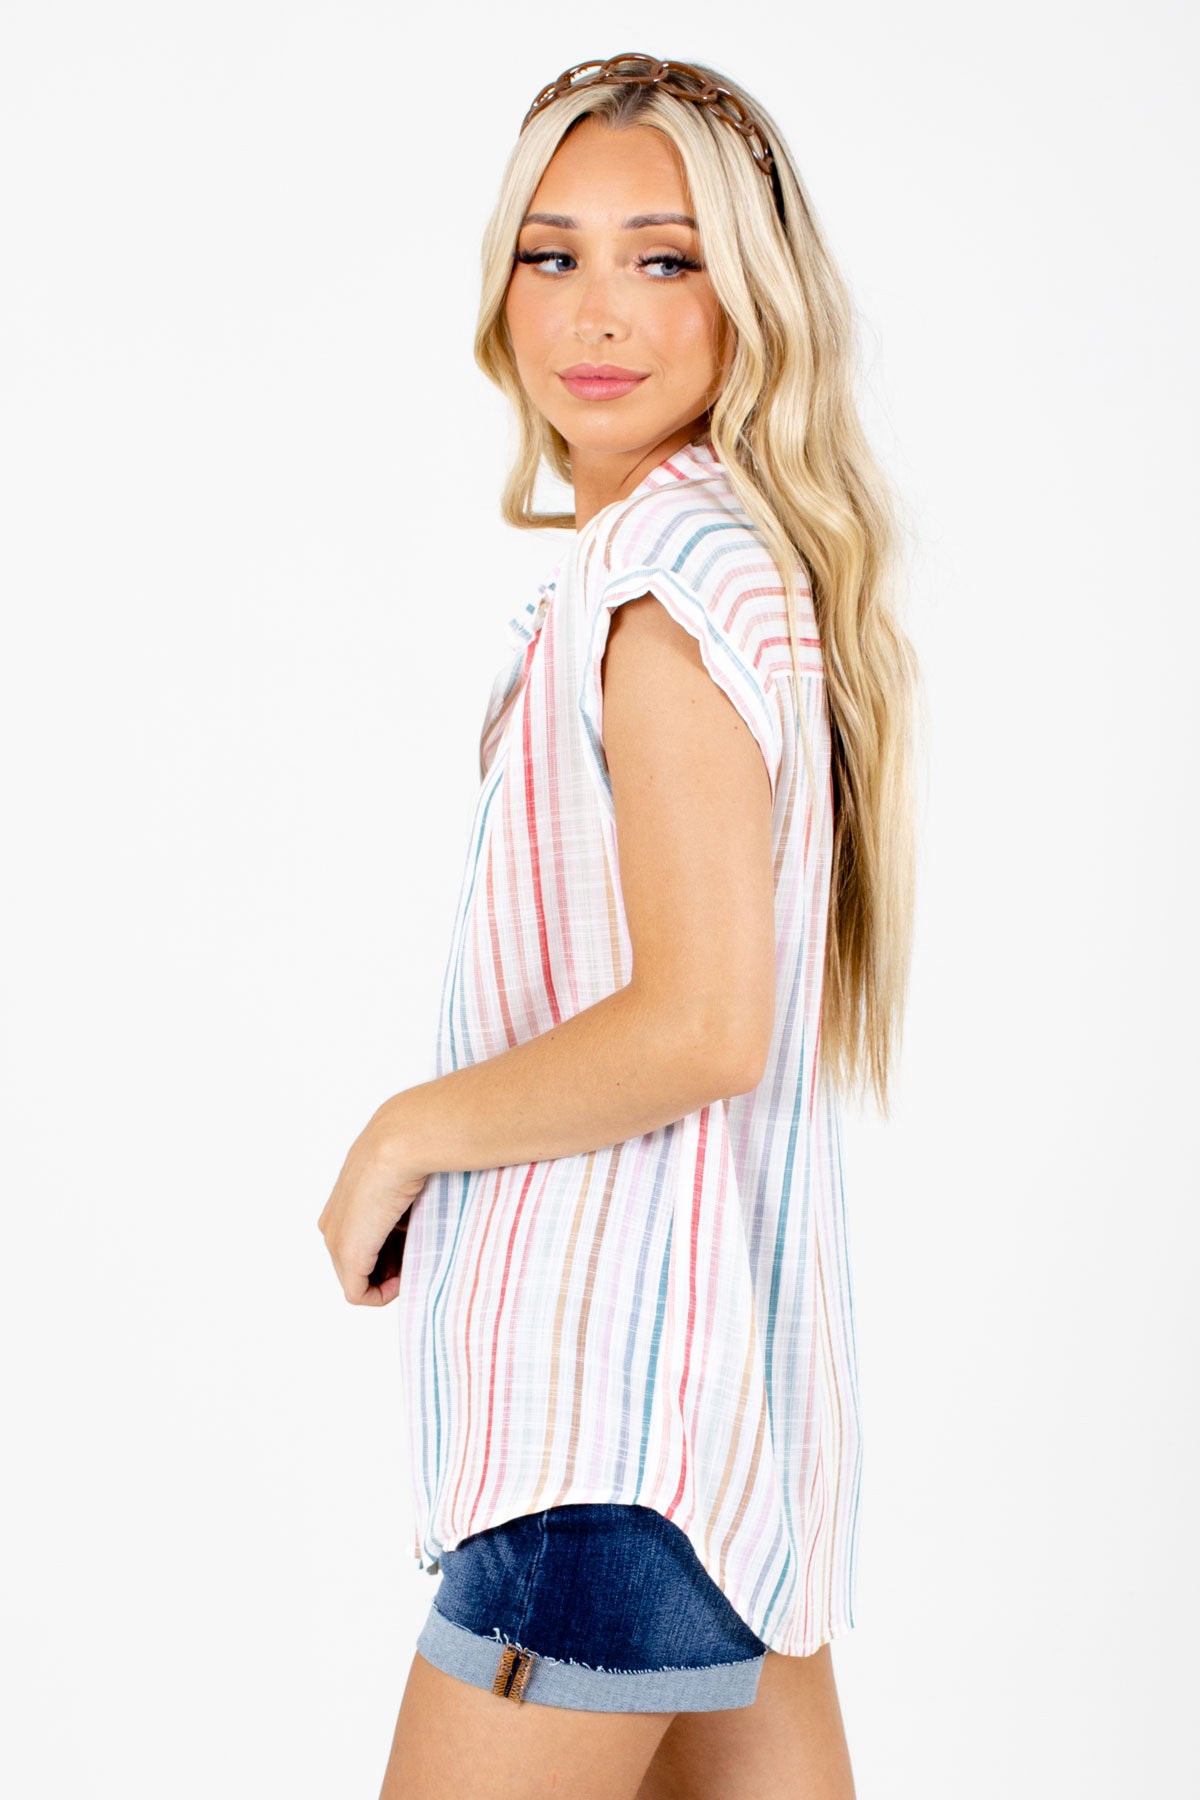 White High-Low Hem Boutique Shirts for Women